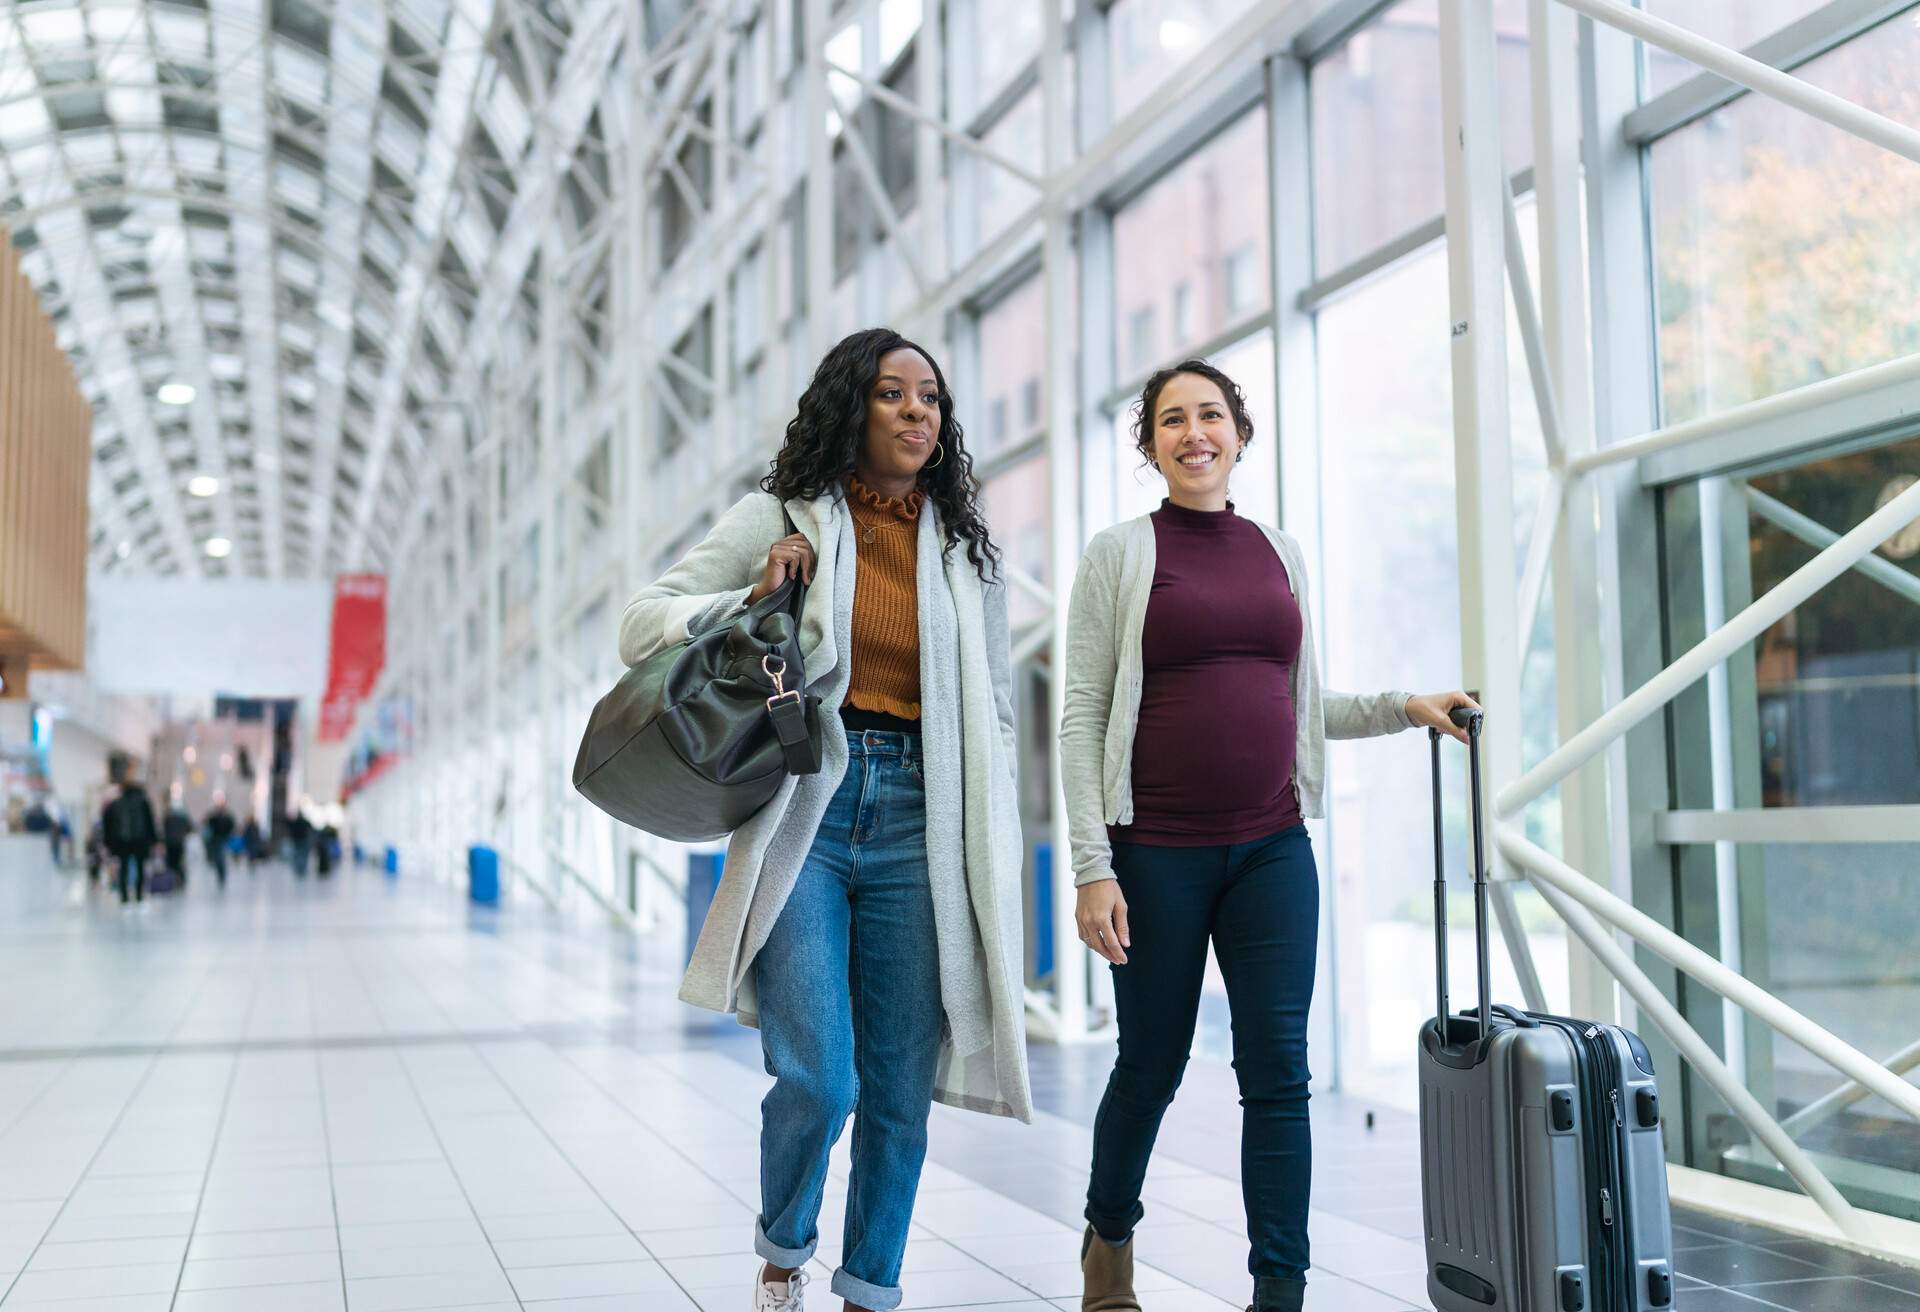 Two female friends are traveling together. One of the women is black and the other is Eurasian. The Eurasian woman is pregnant. The smiling women are talking happily. They are carrying luggage while walking side by side through the airport. Babymoon and safety while traveling pregnant concept.